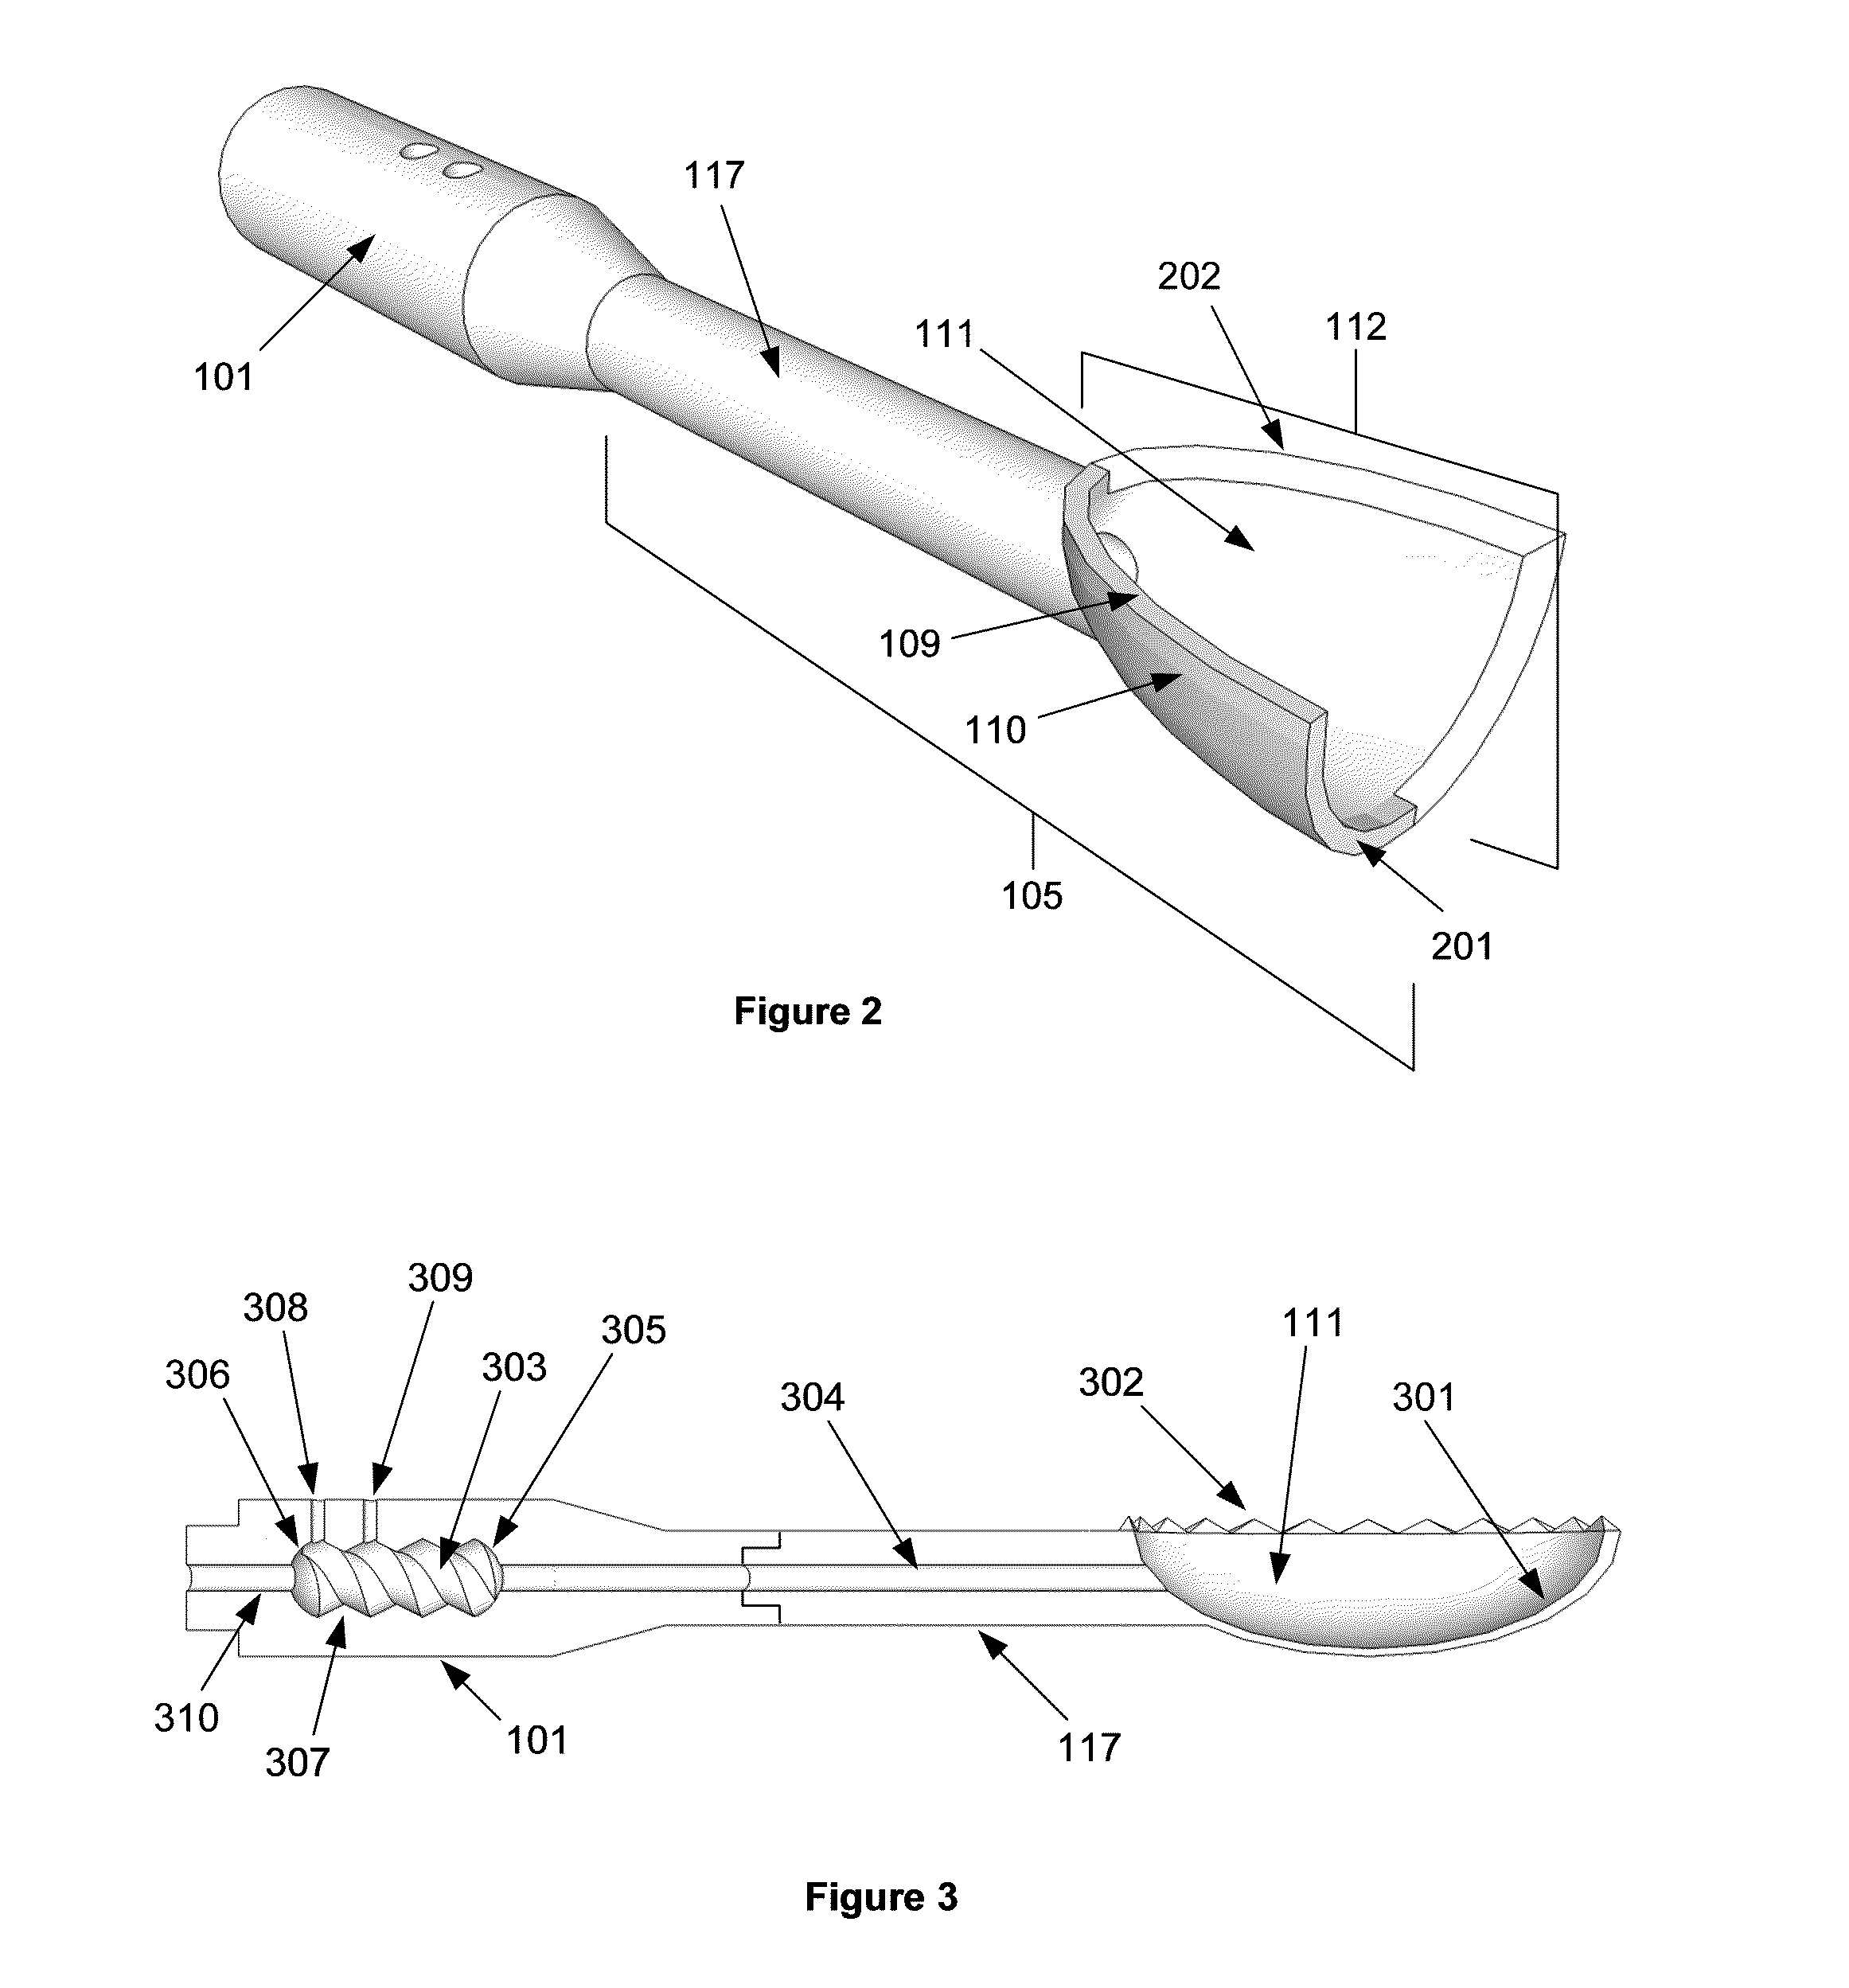 Apparatus for creating a therapeutic solution and debridement with ultrasound energy